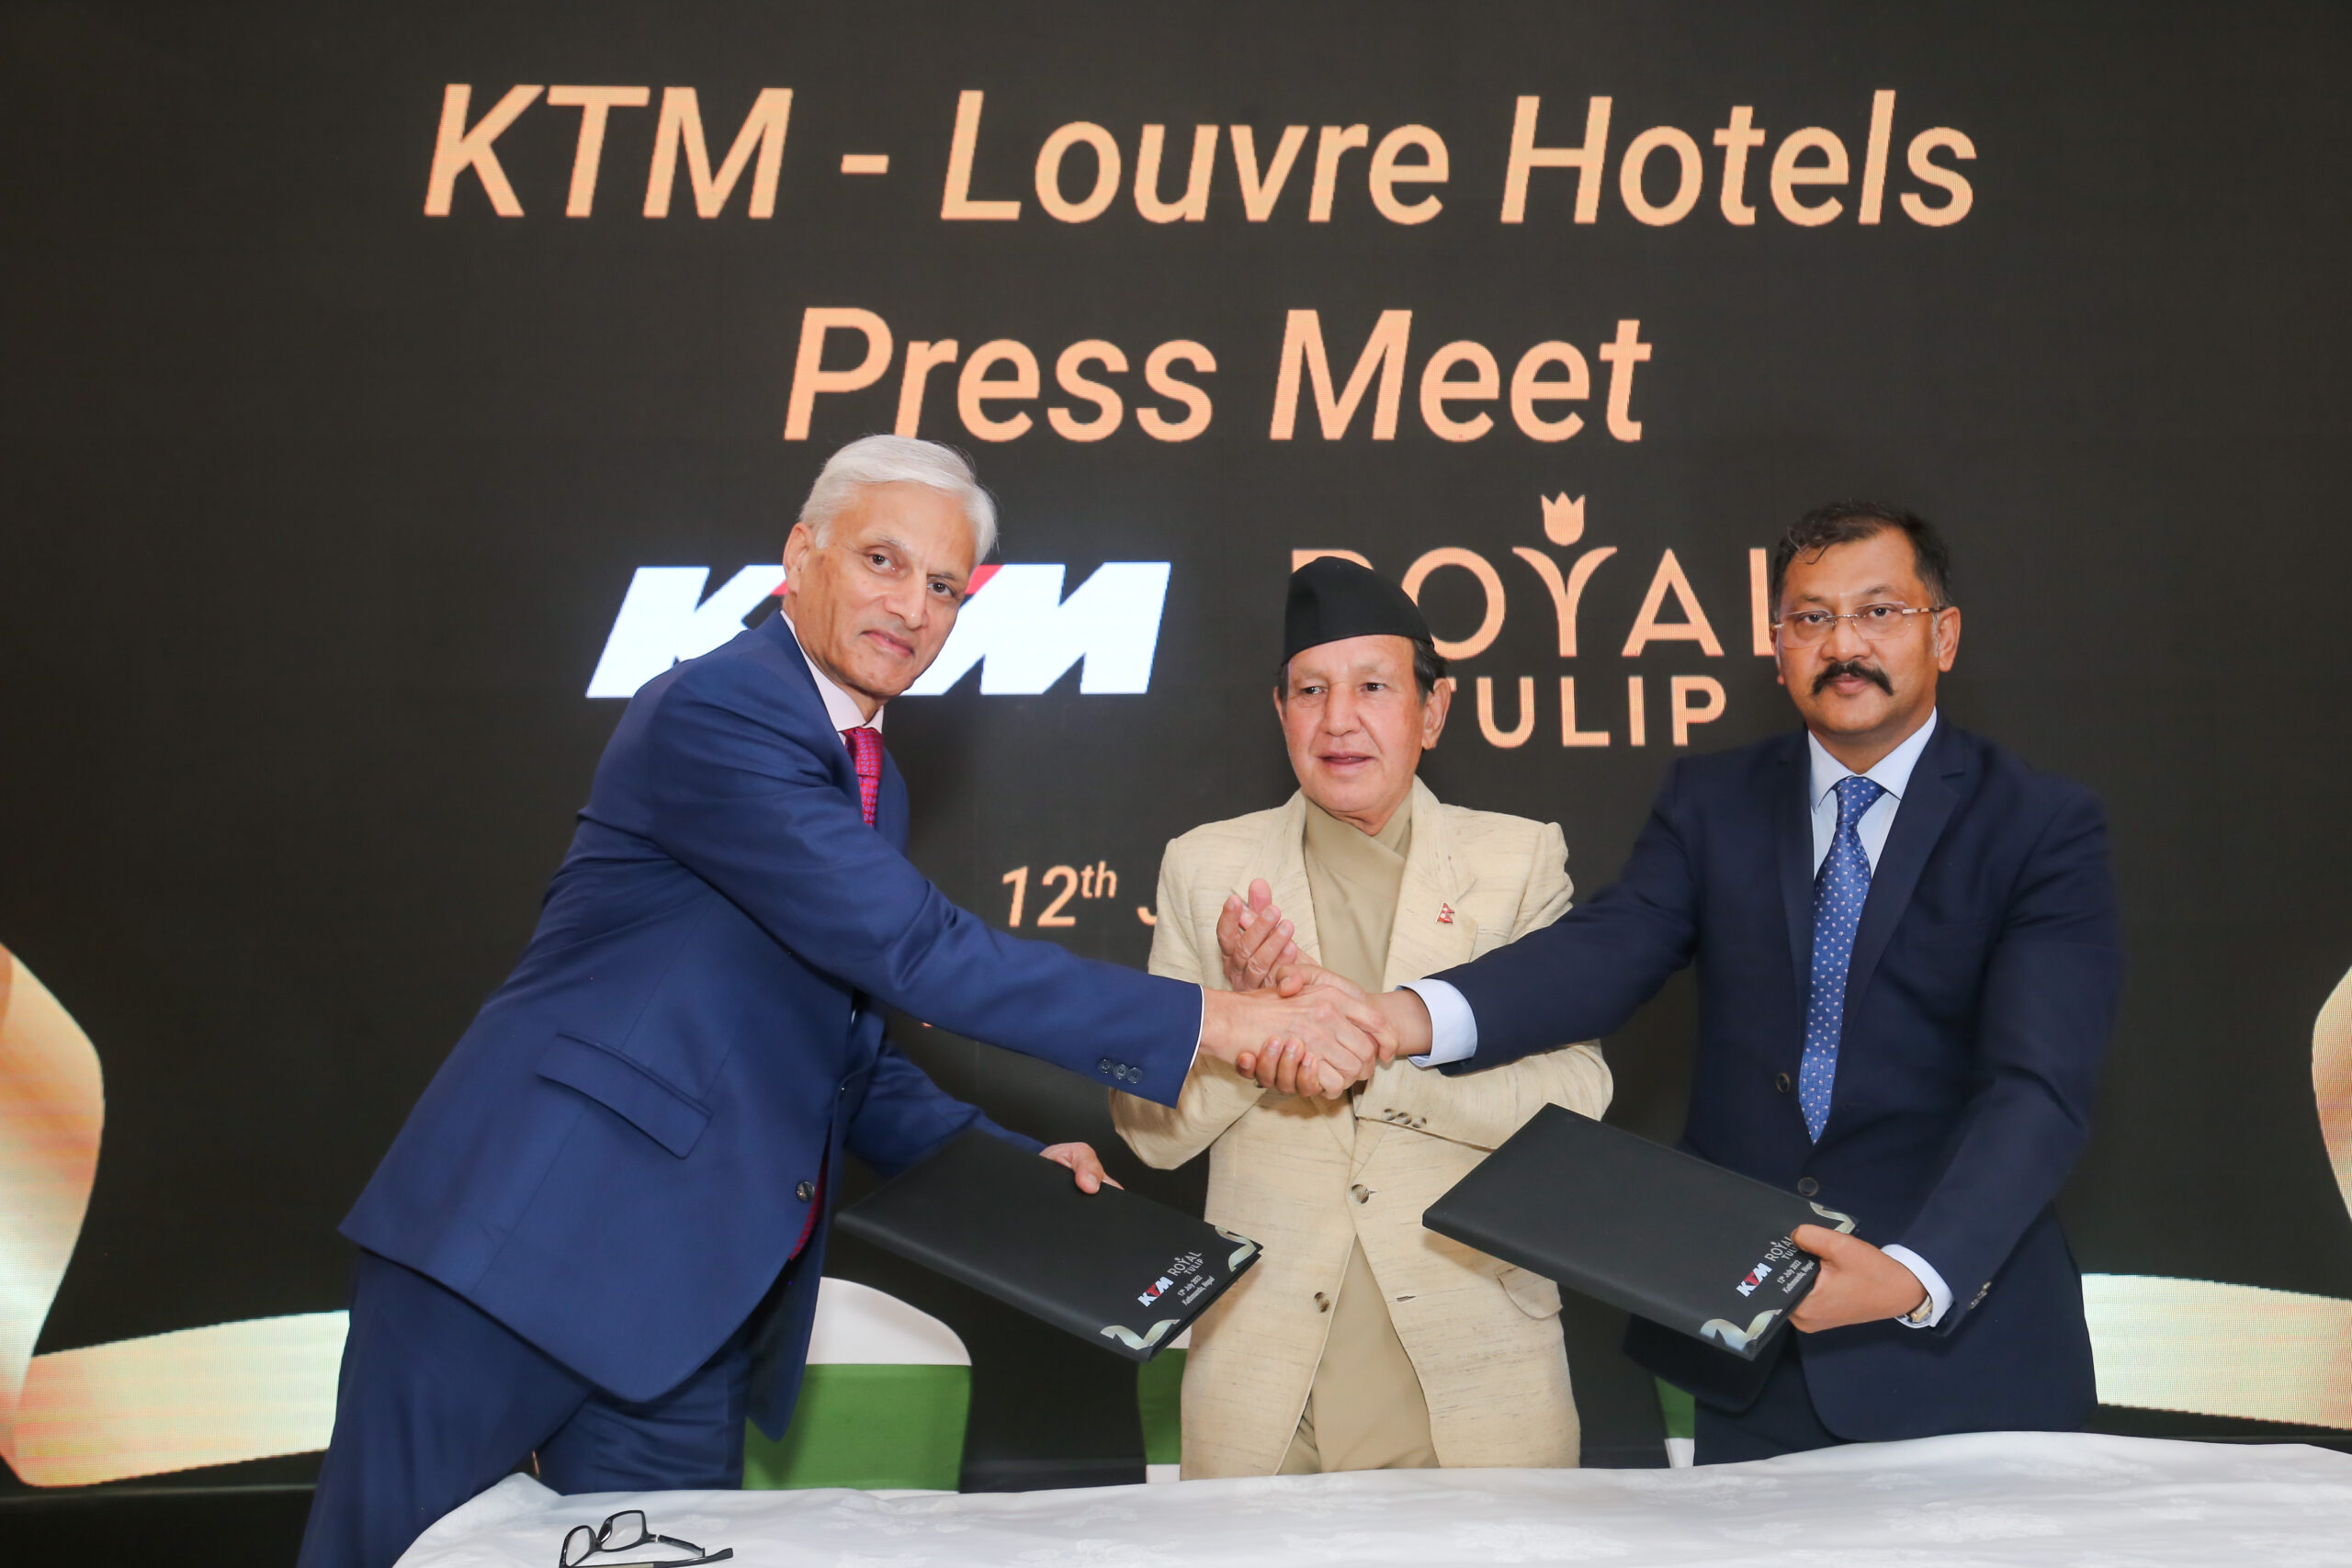 Louvre Hotel’s Royal Tulip Now in Nepal